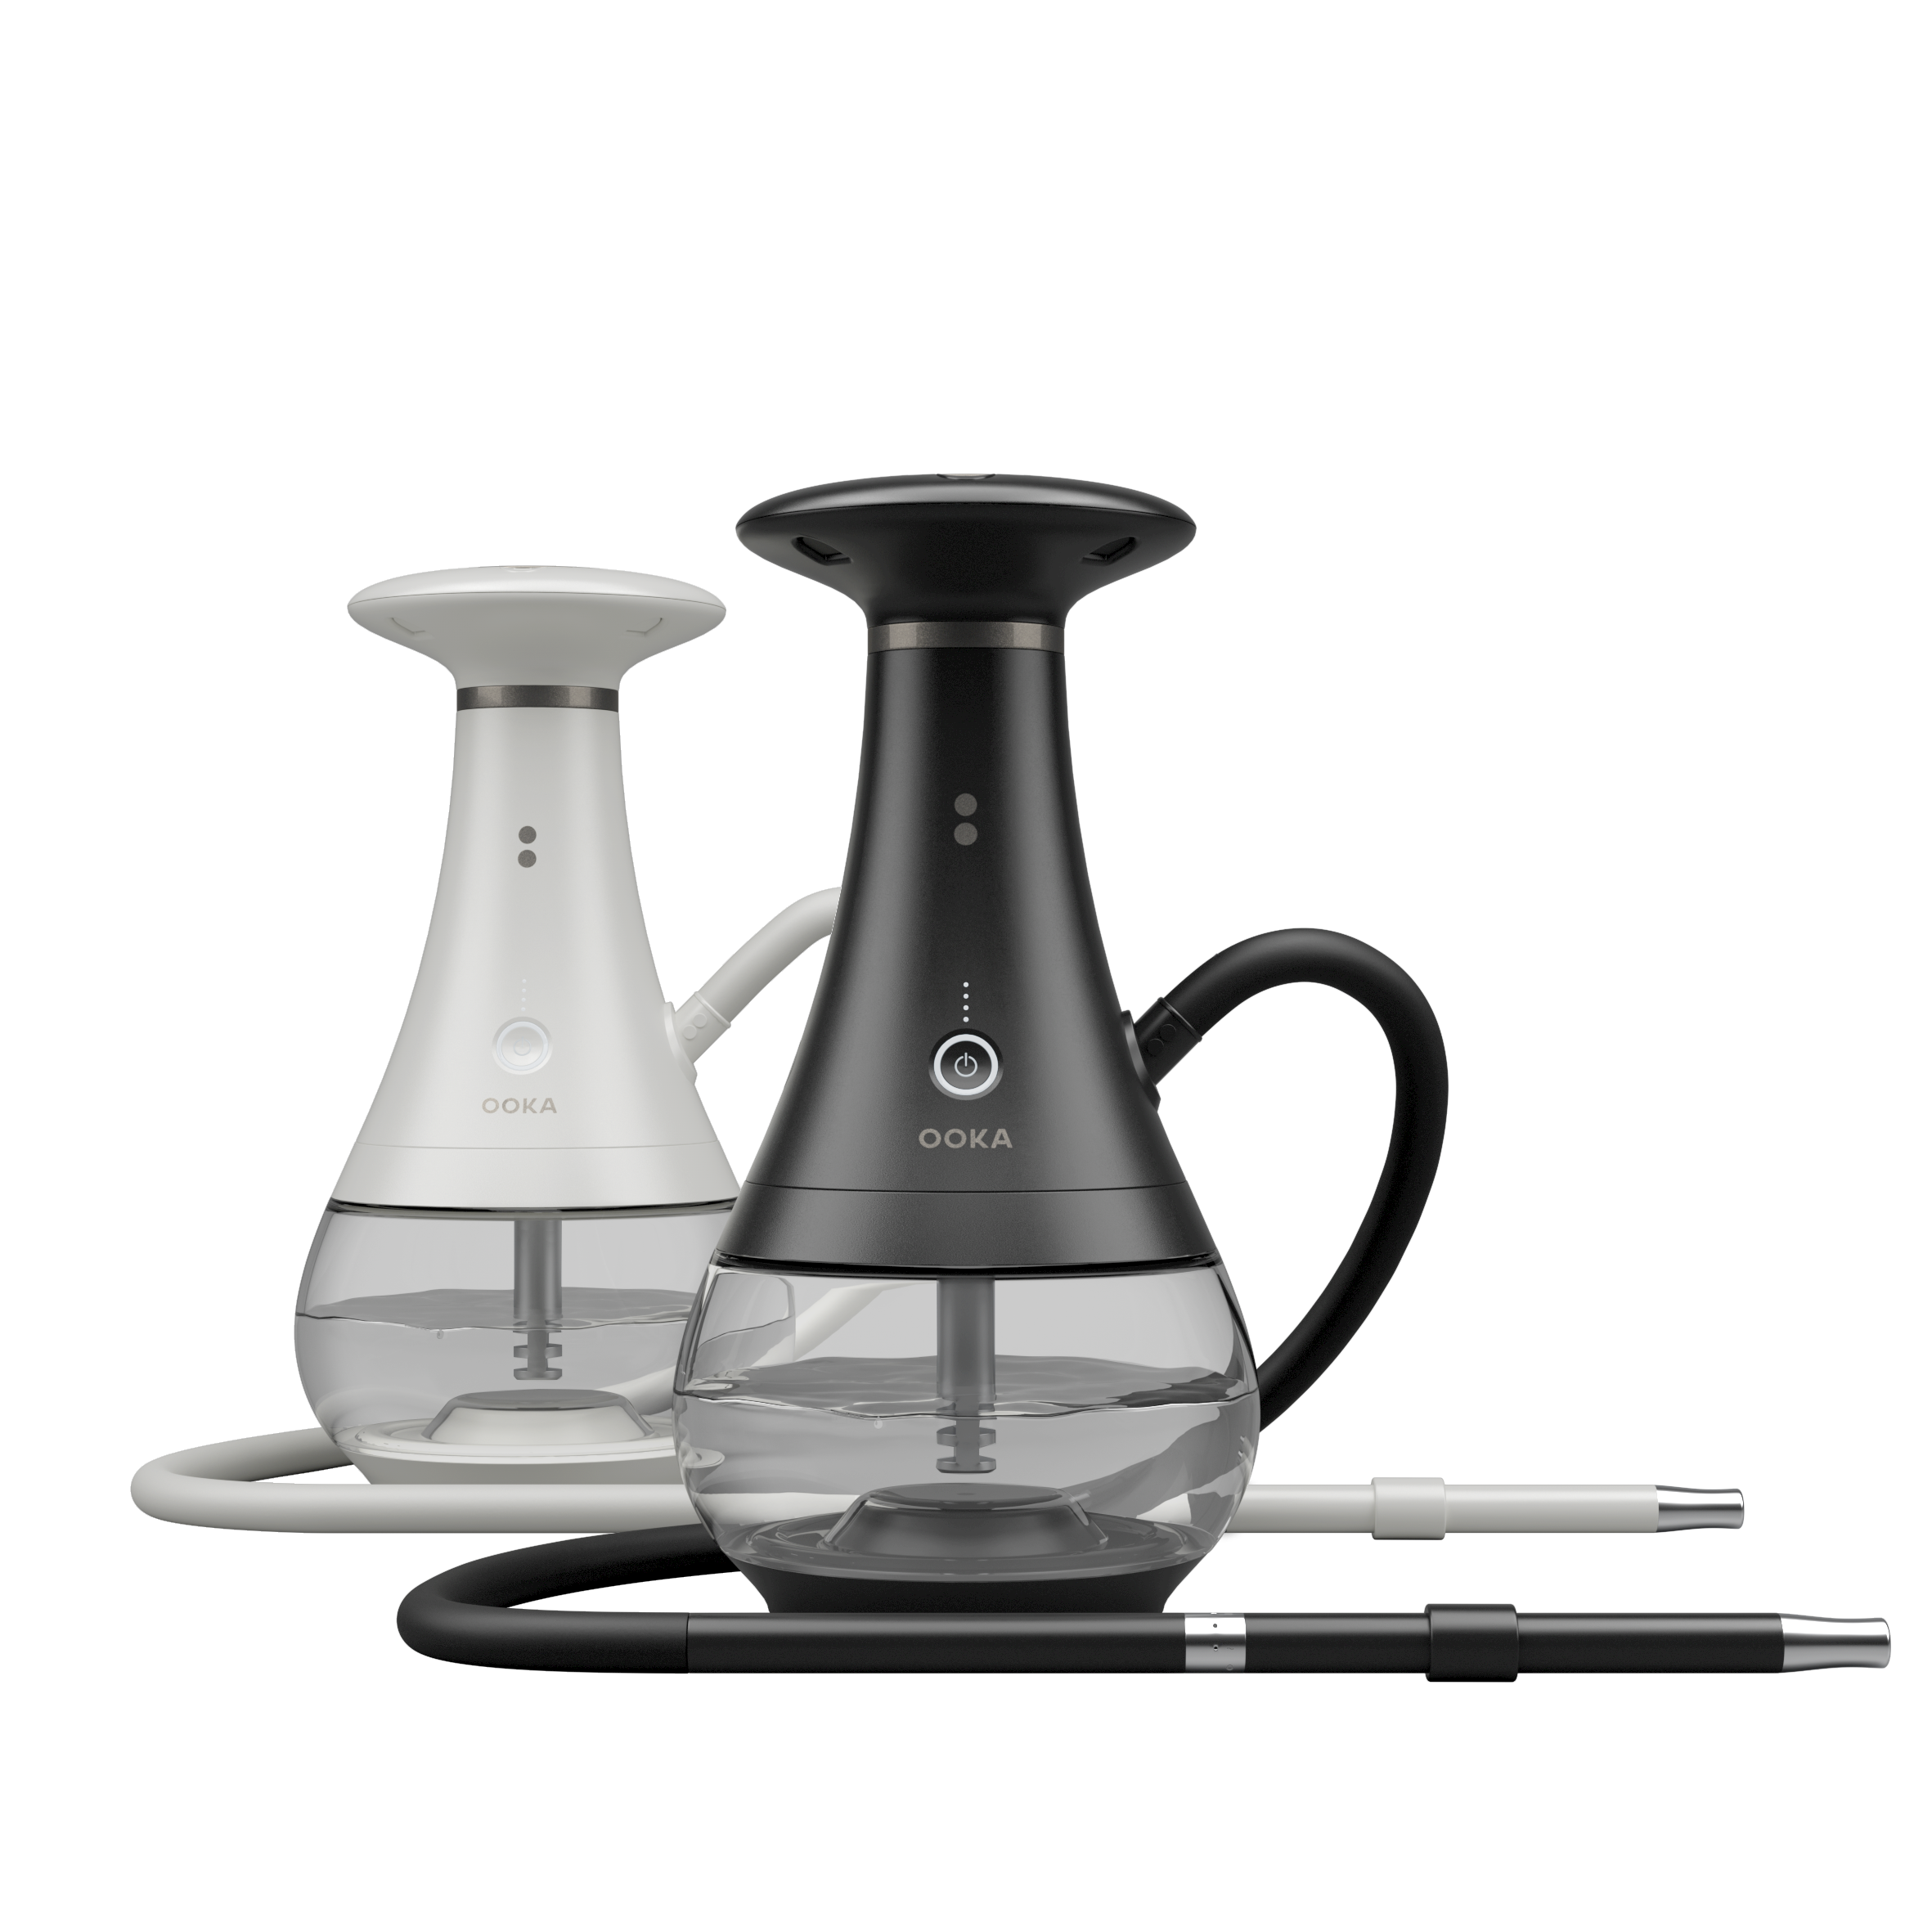 Black and white Ooka devices